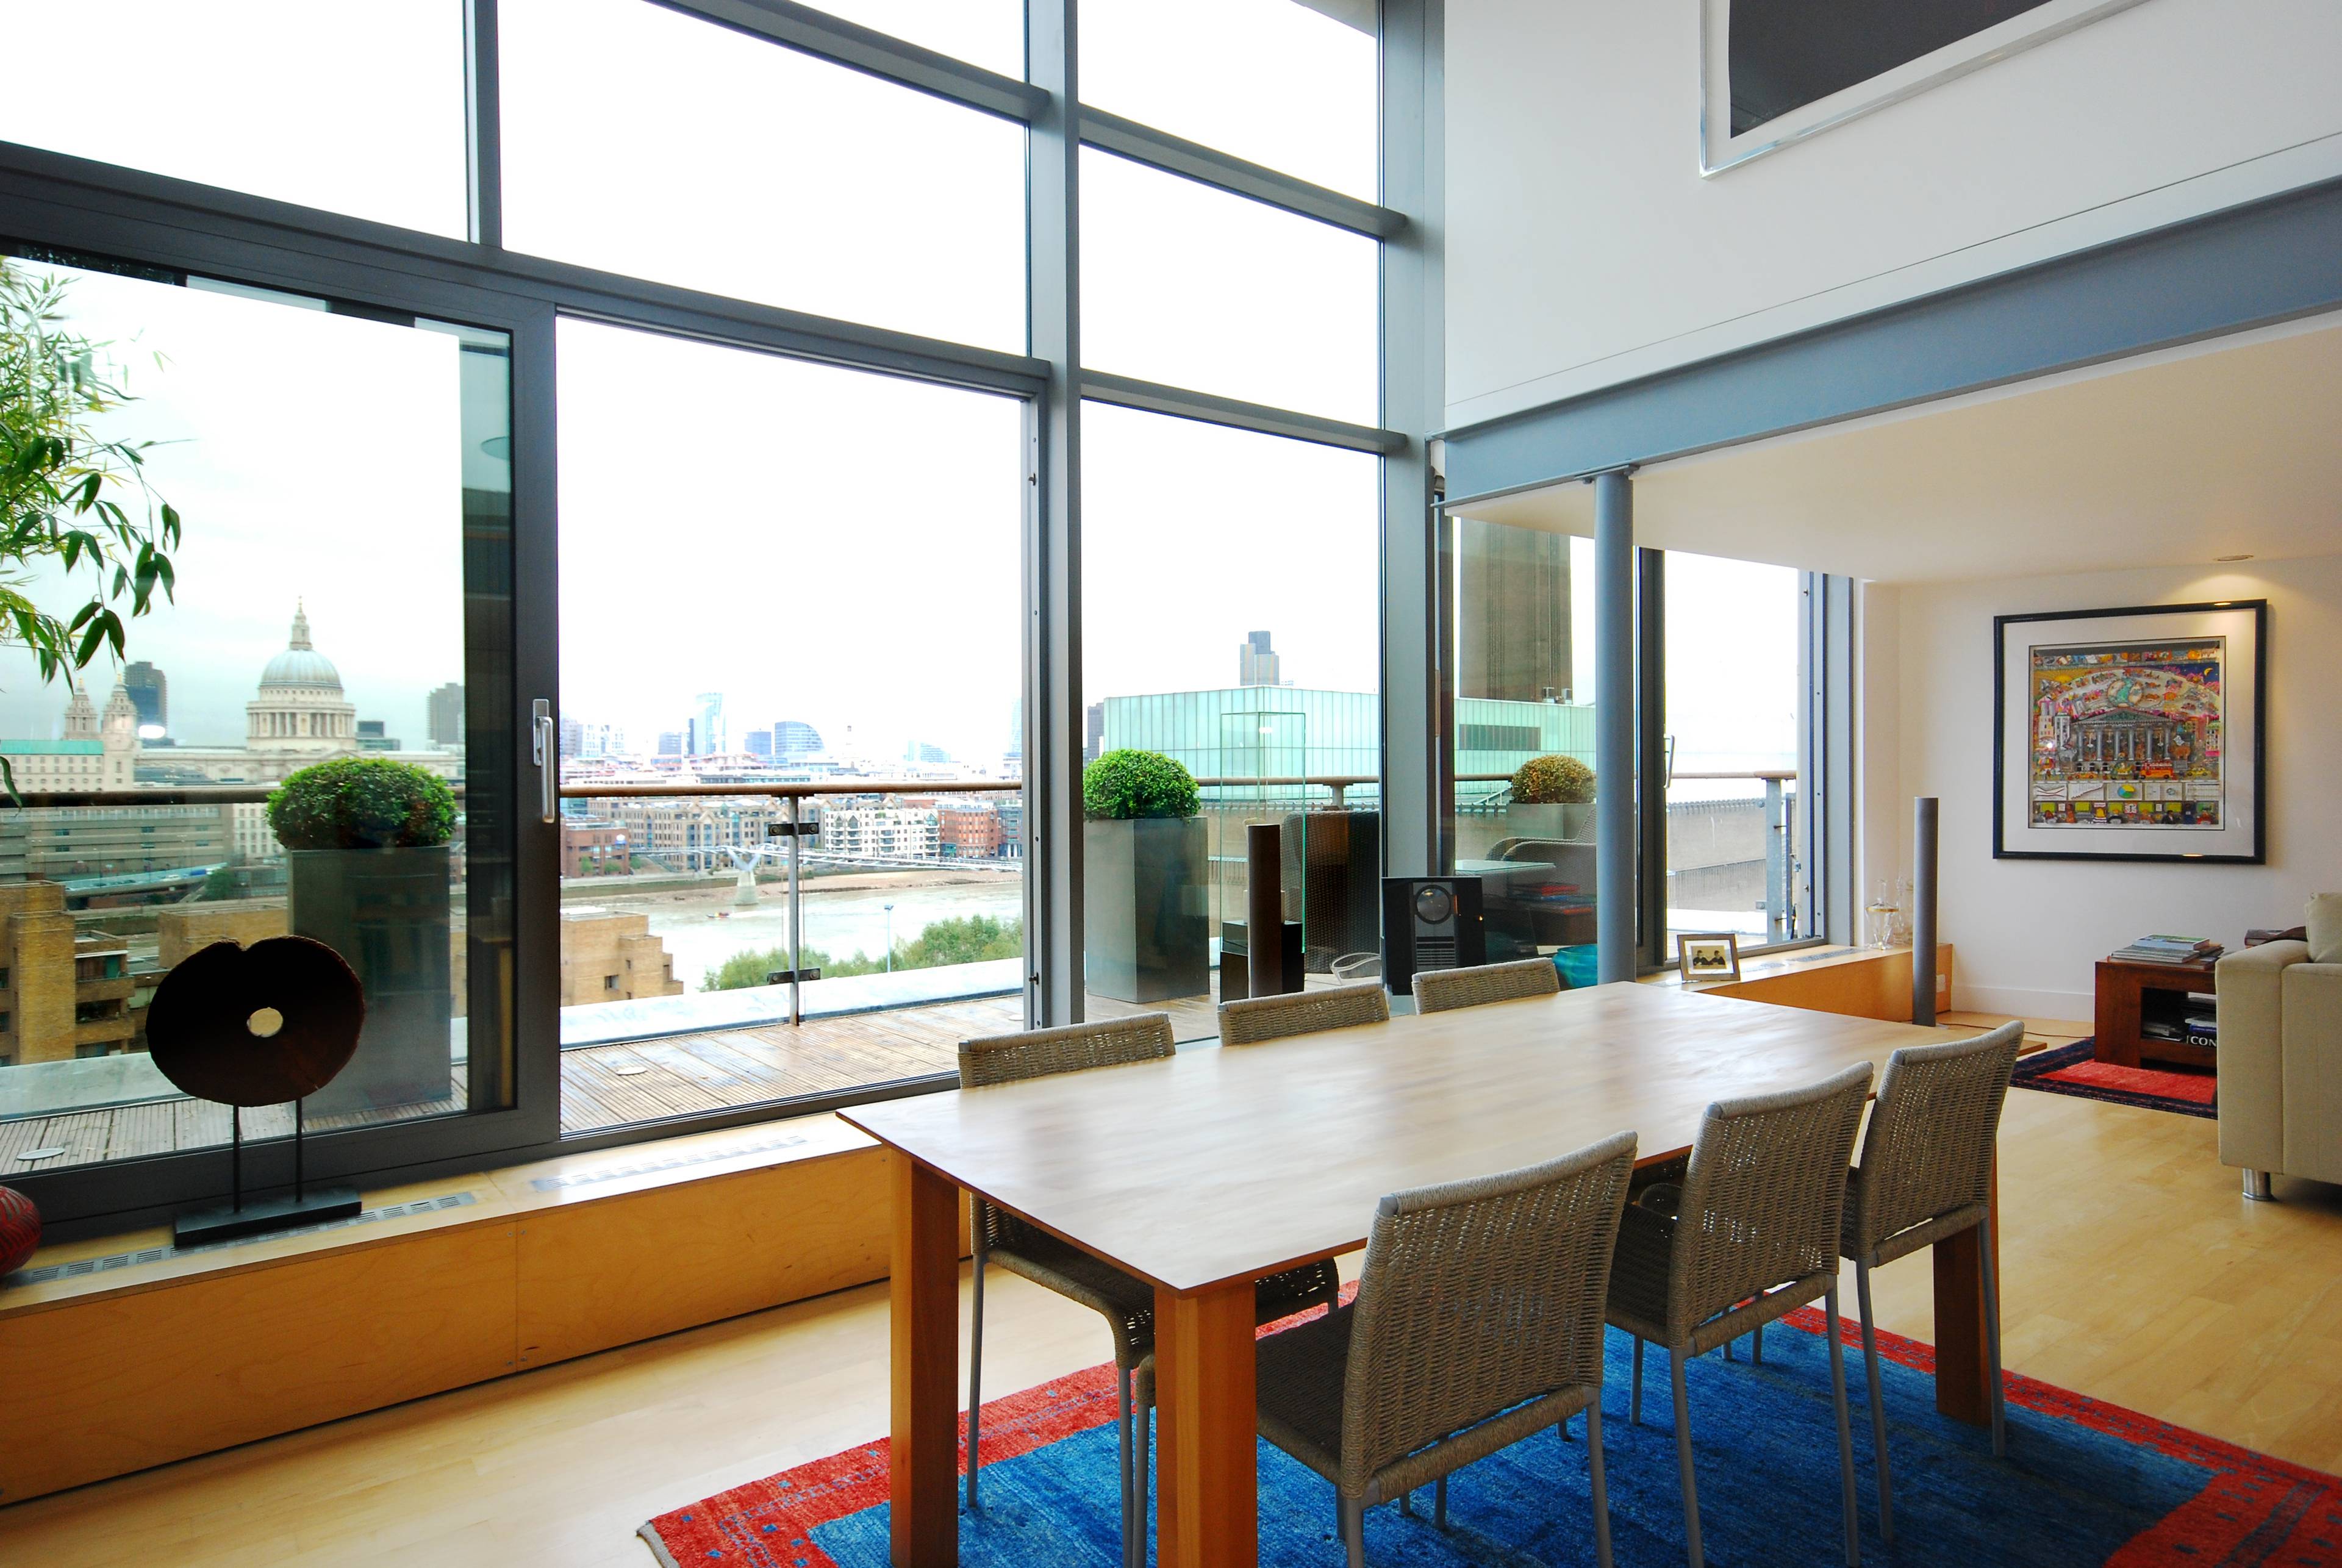 A fantastic interior designed penthouse apartment next to the Tate Modern provides residents with fabulous views of the River Thames and St Pauls Cathedral.